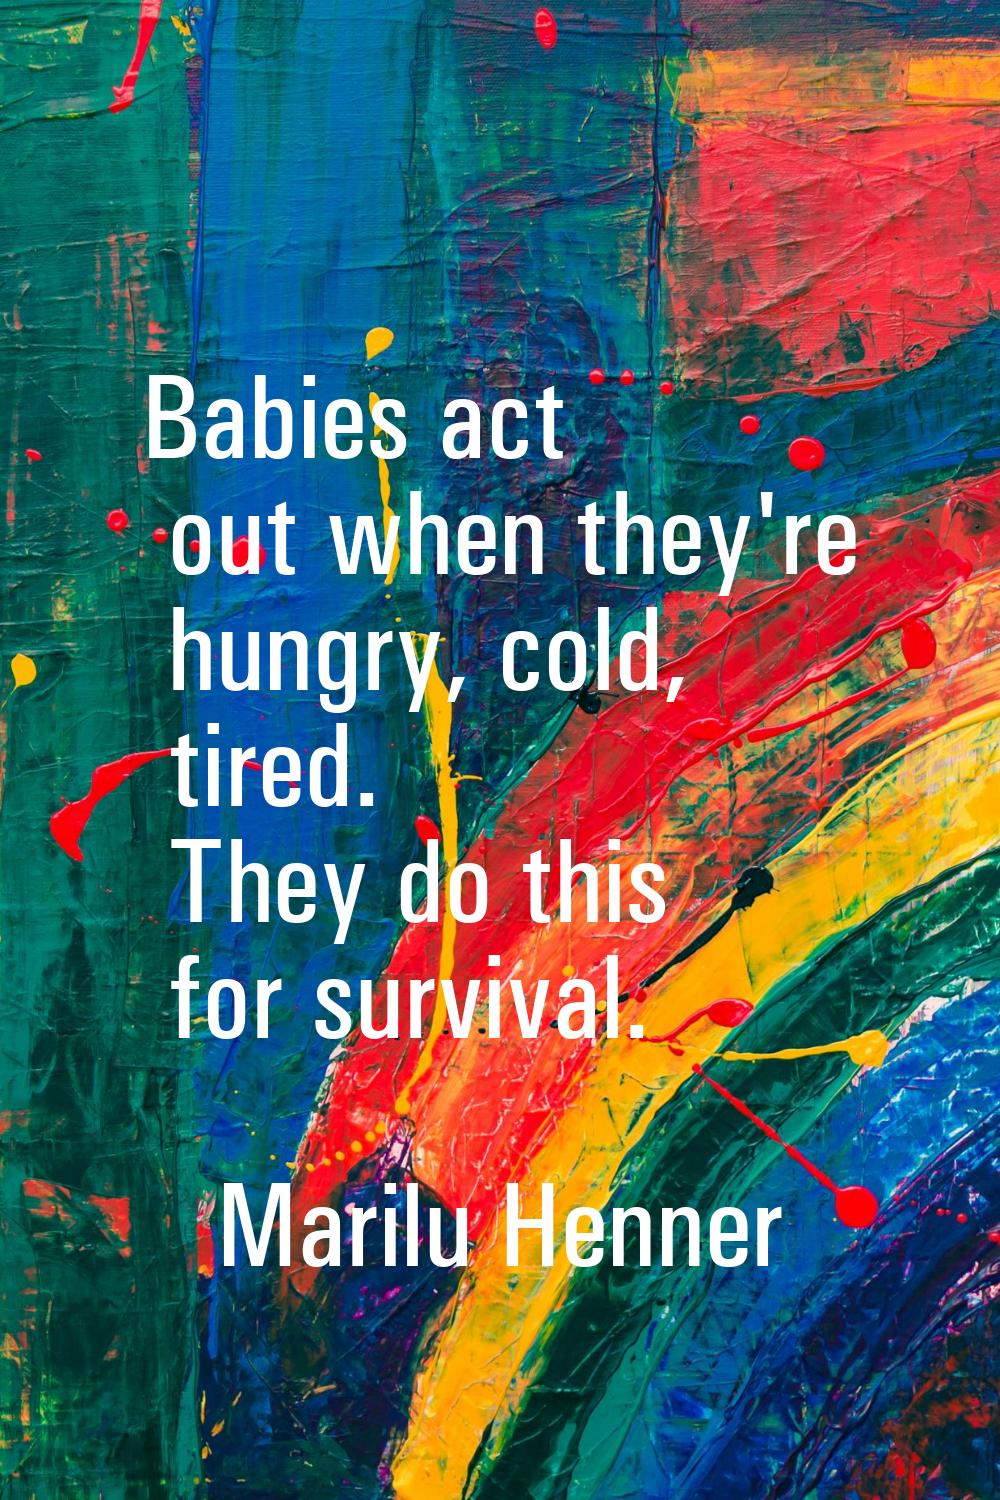 Babies act out when they're hungry, cold, tired. They do this for survival.